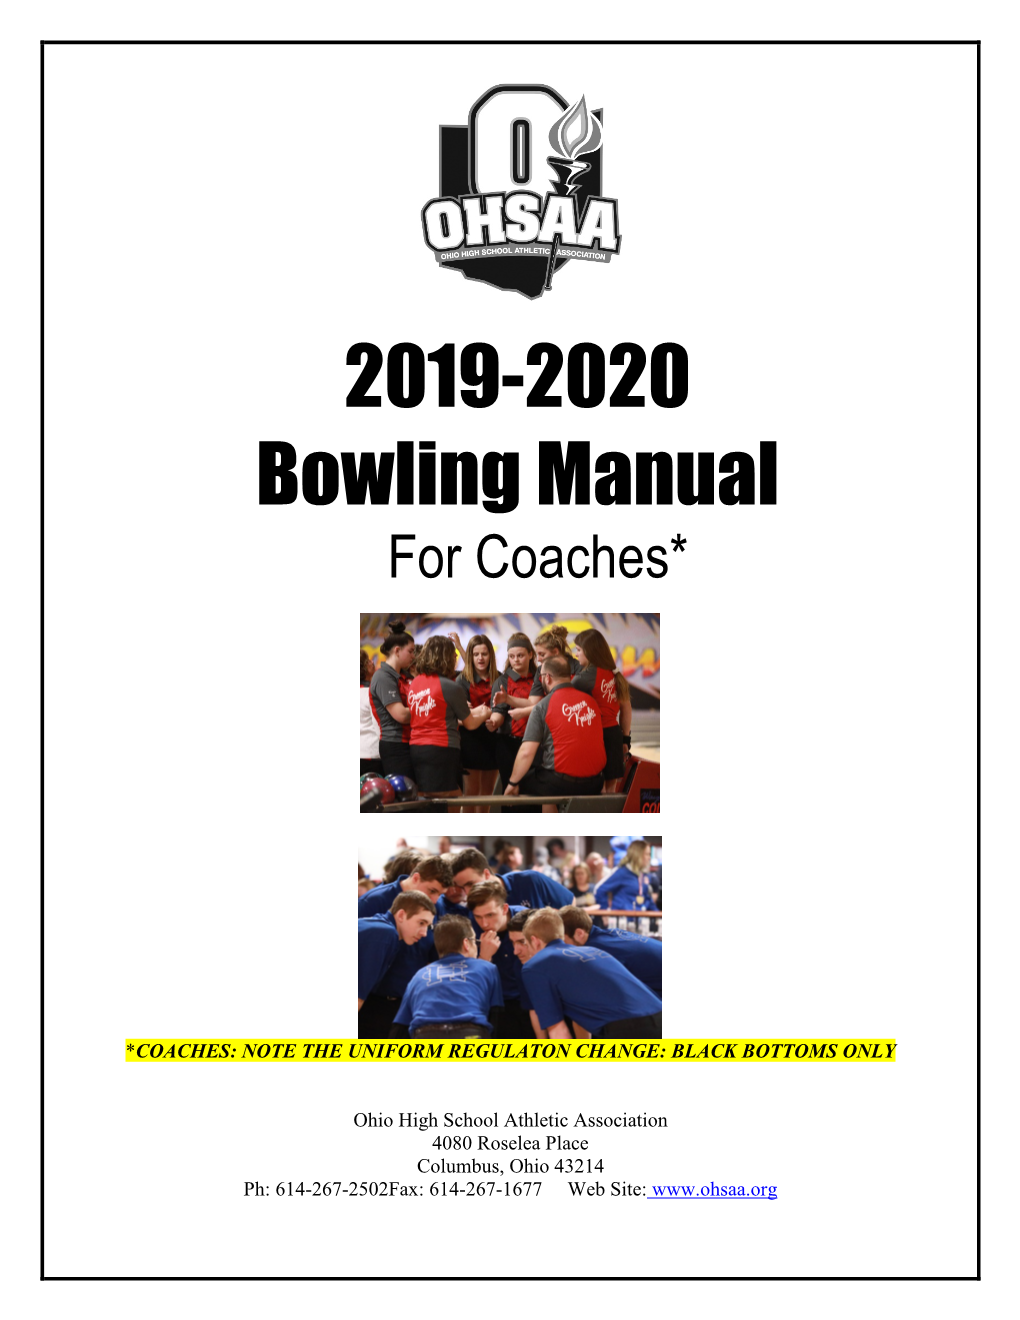 2019-2020 Bowling Manual for Coaches*